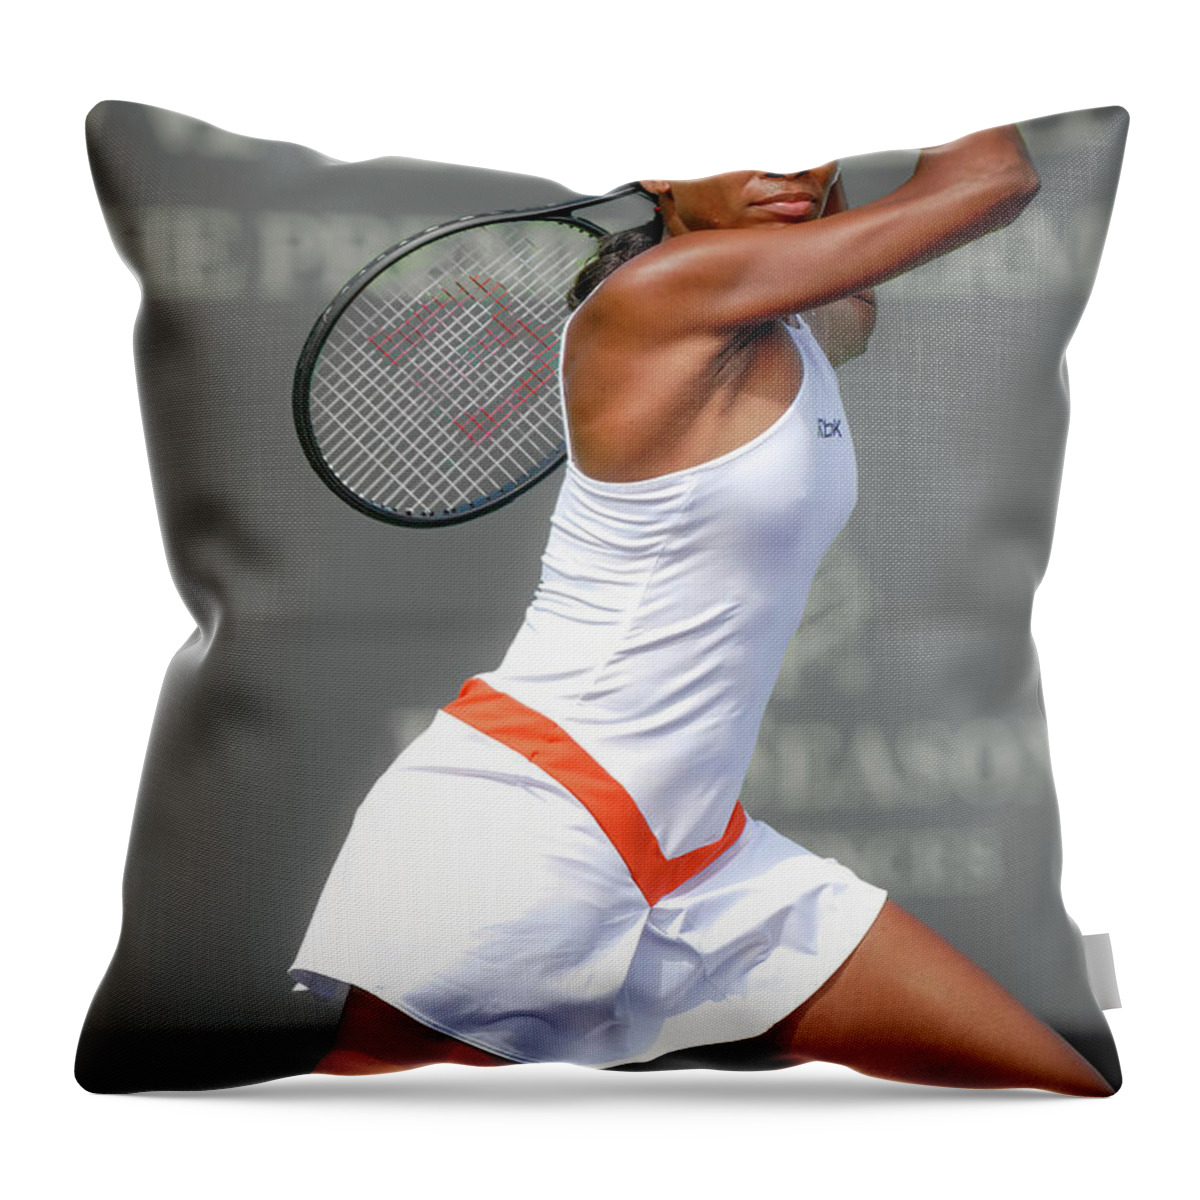 Venus Williams At The 2007 Sony Ericsson Ope In Miami Throw Pillow featuring the photograph Venus Williams by Lou Novick